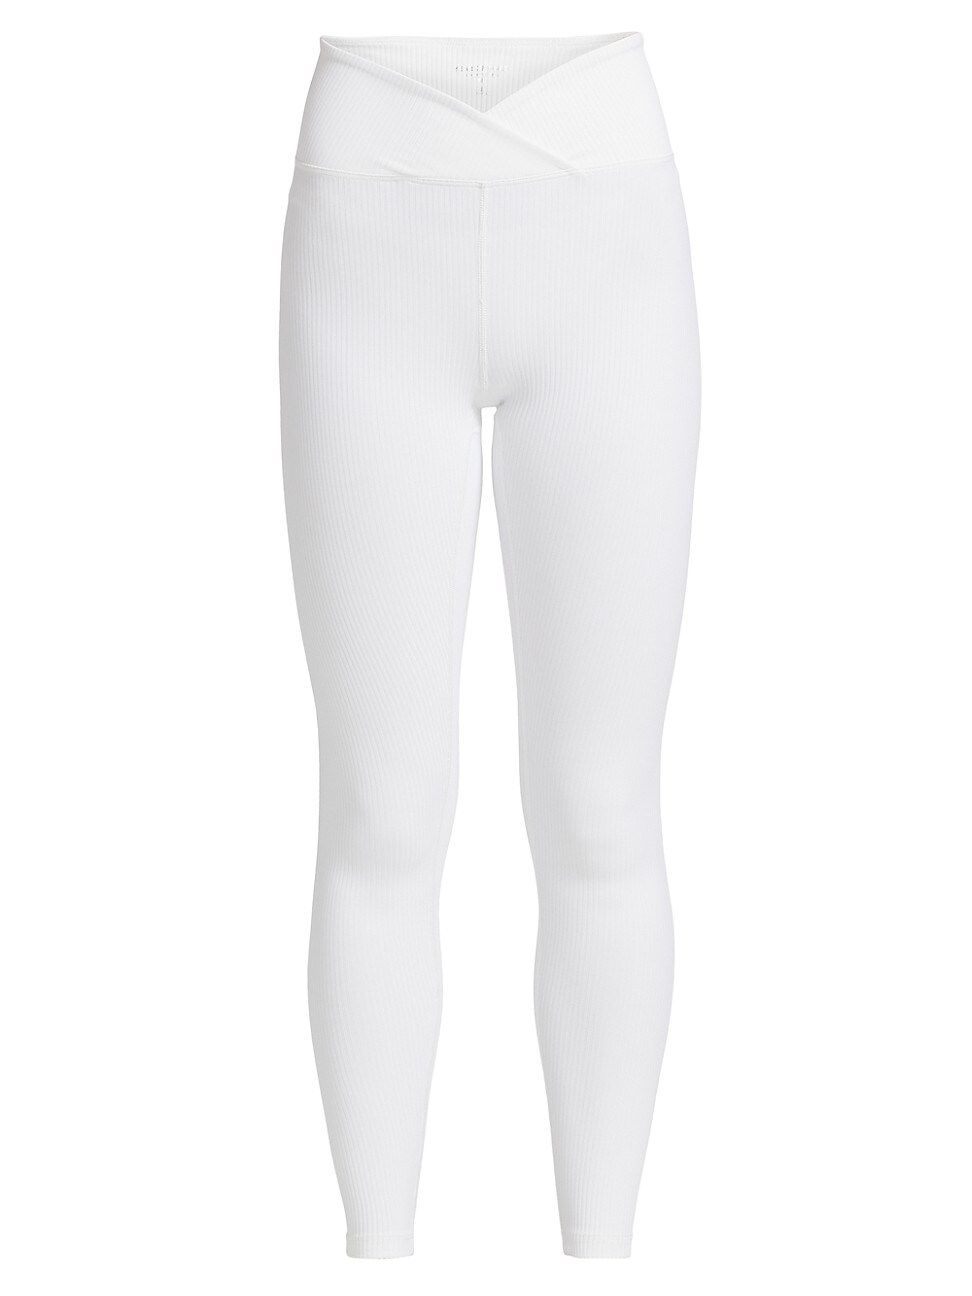 Year Of Ours Women's Veronica Ribbed Leggings - White - Size Medium | Saks Fifth Avenue